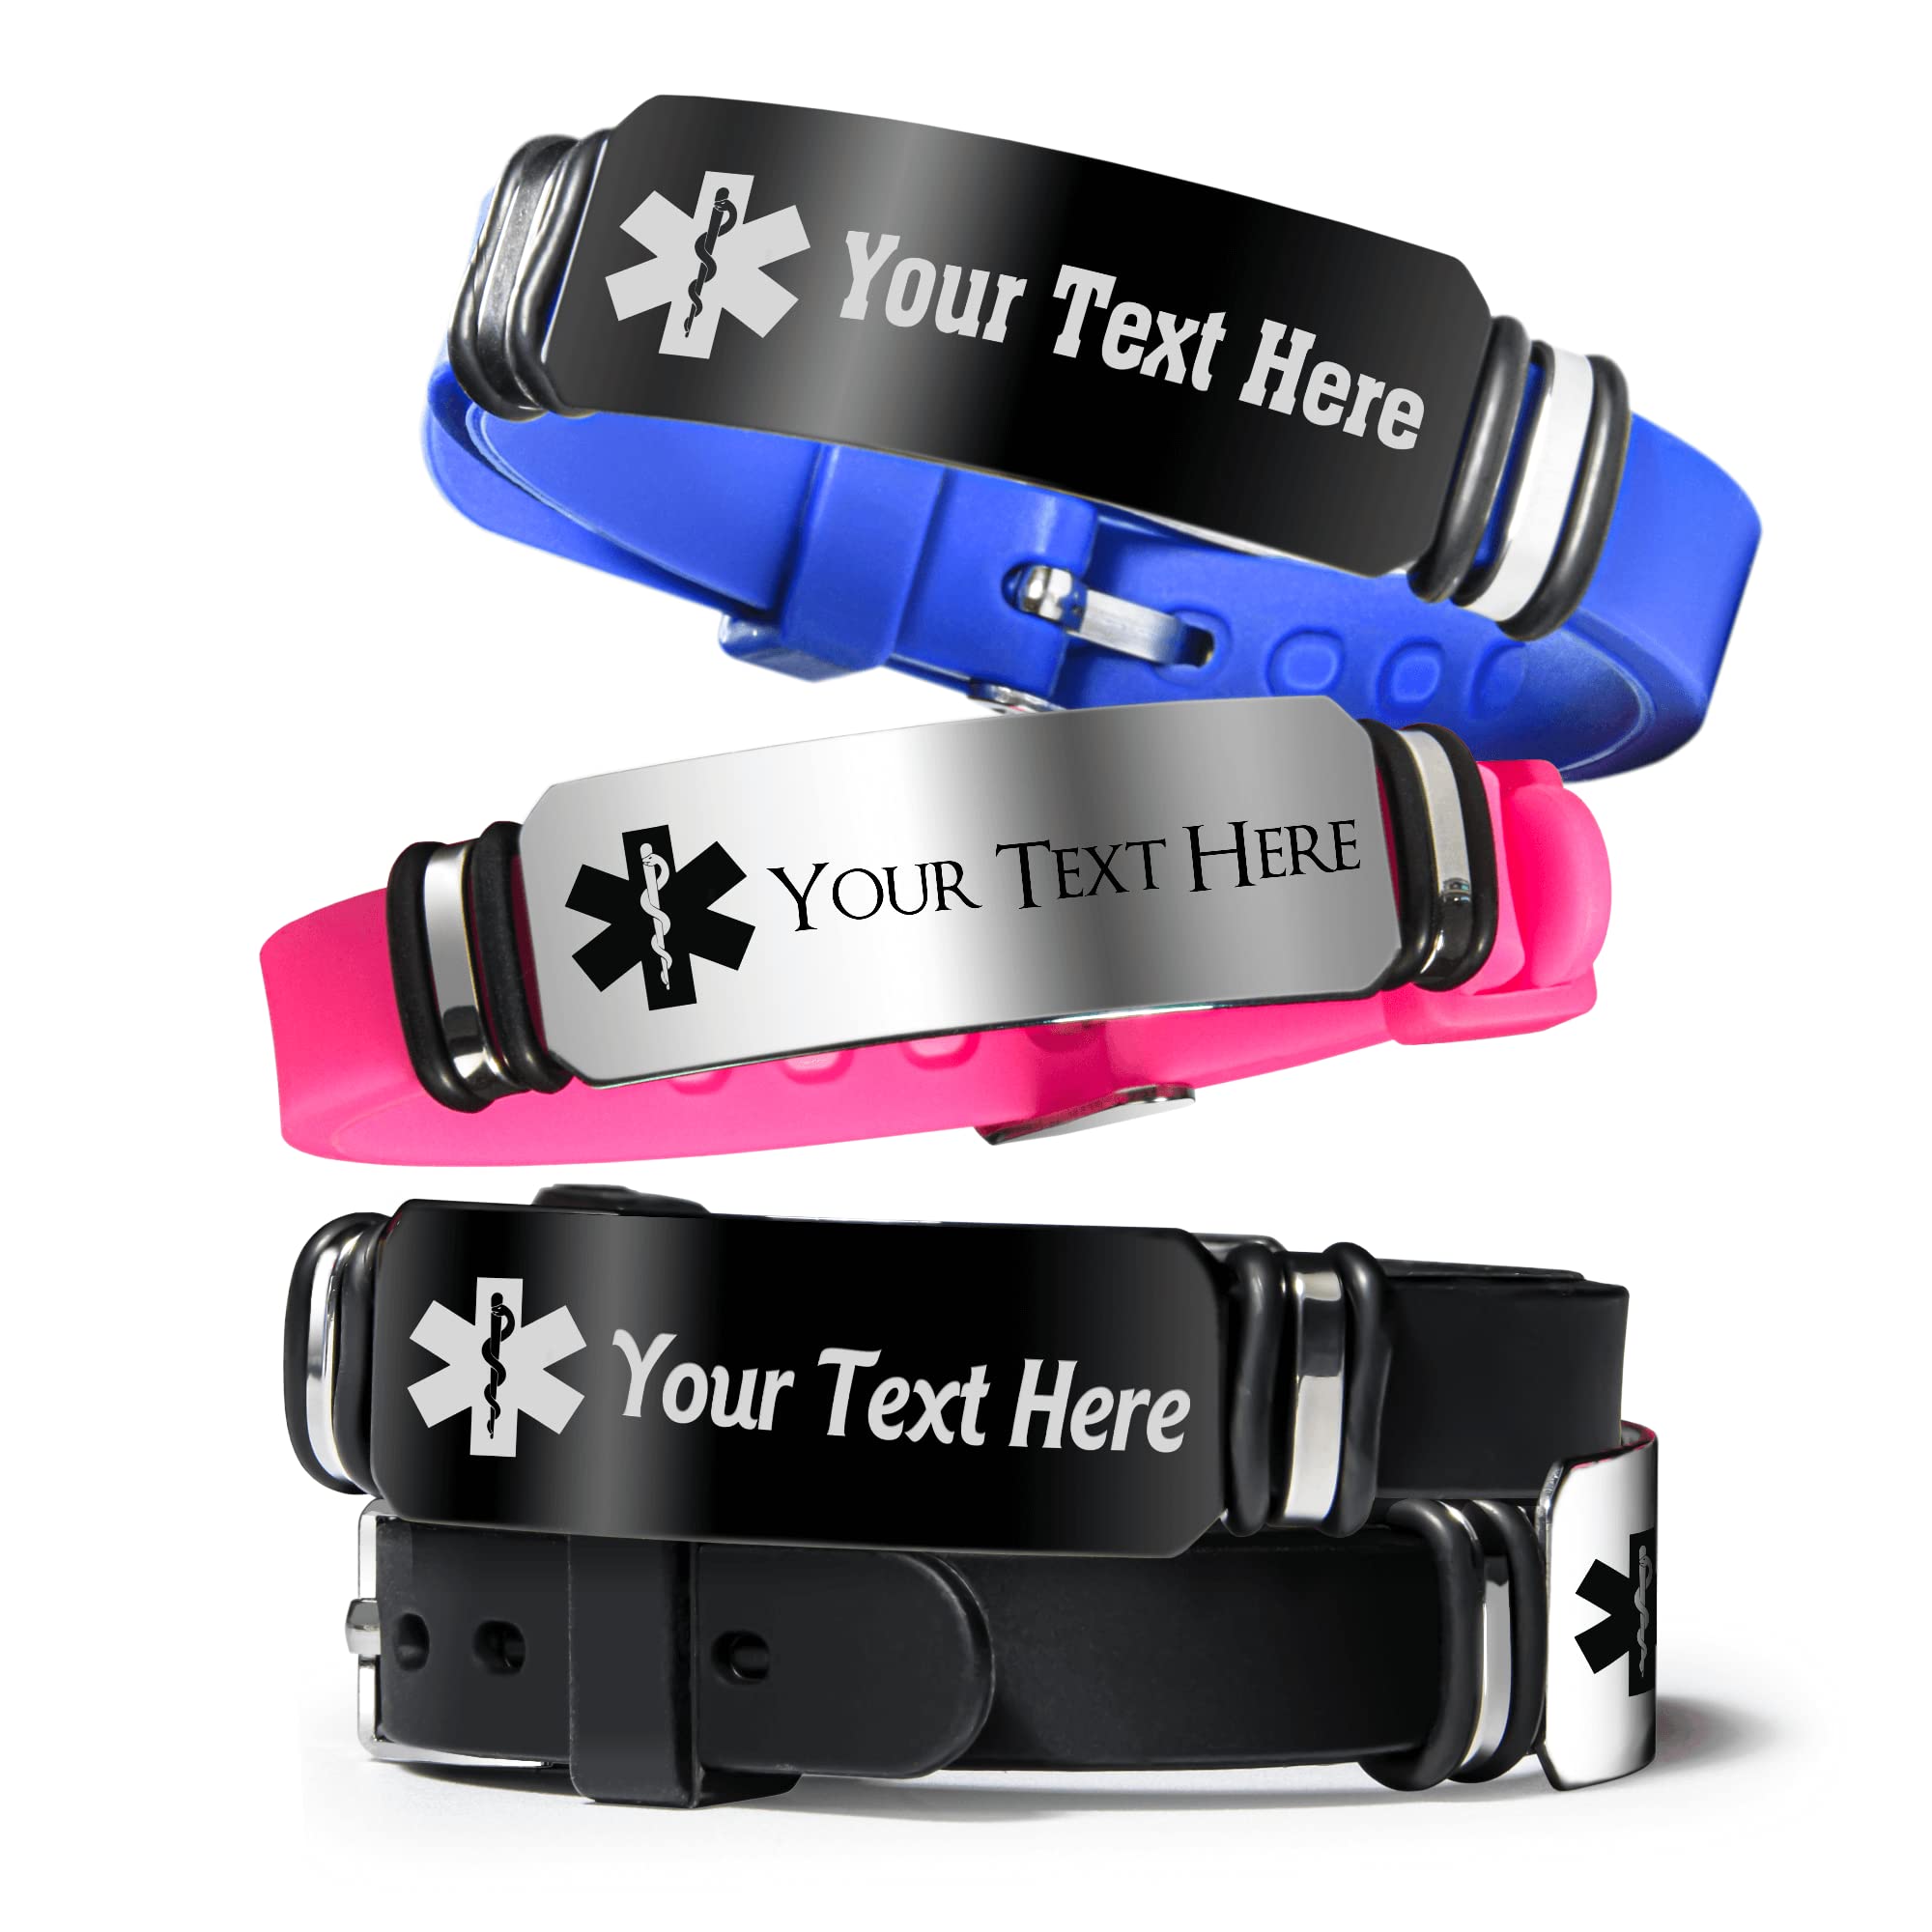 Sport Silicone Alert Bracelet for Men and Women. Personalized Engraving,  Emergency Medical Card for Your Emergency Medical Information.  Complimentary Access PHR (Personal Health Record) - Pink - Walmart.com